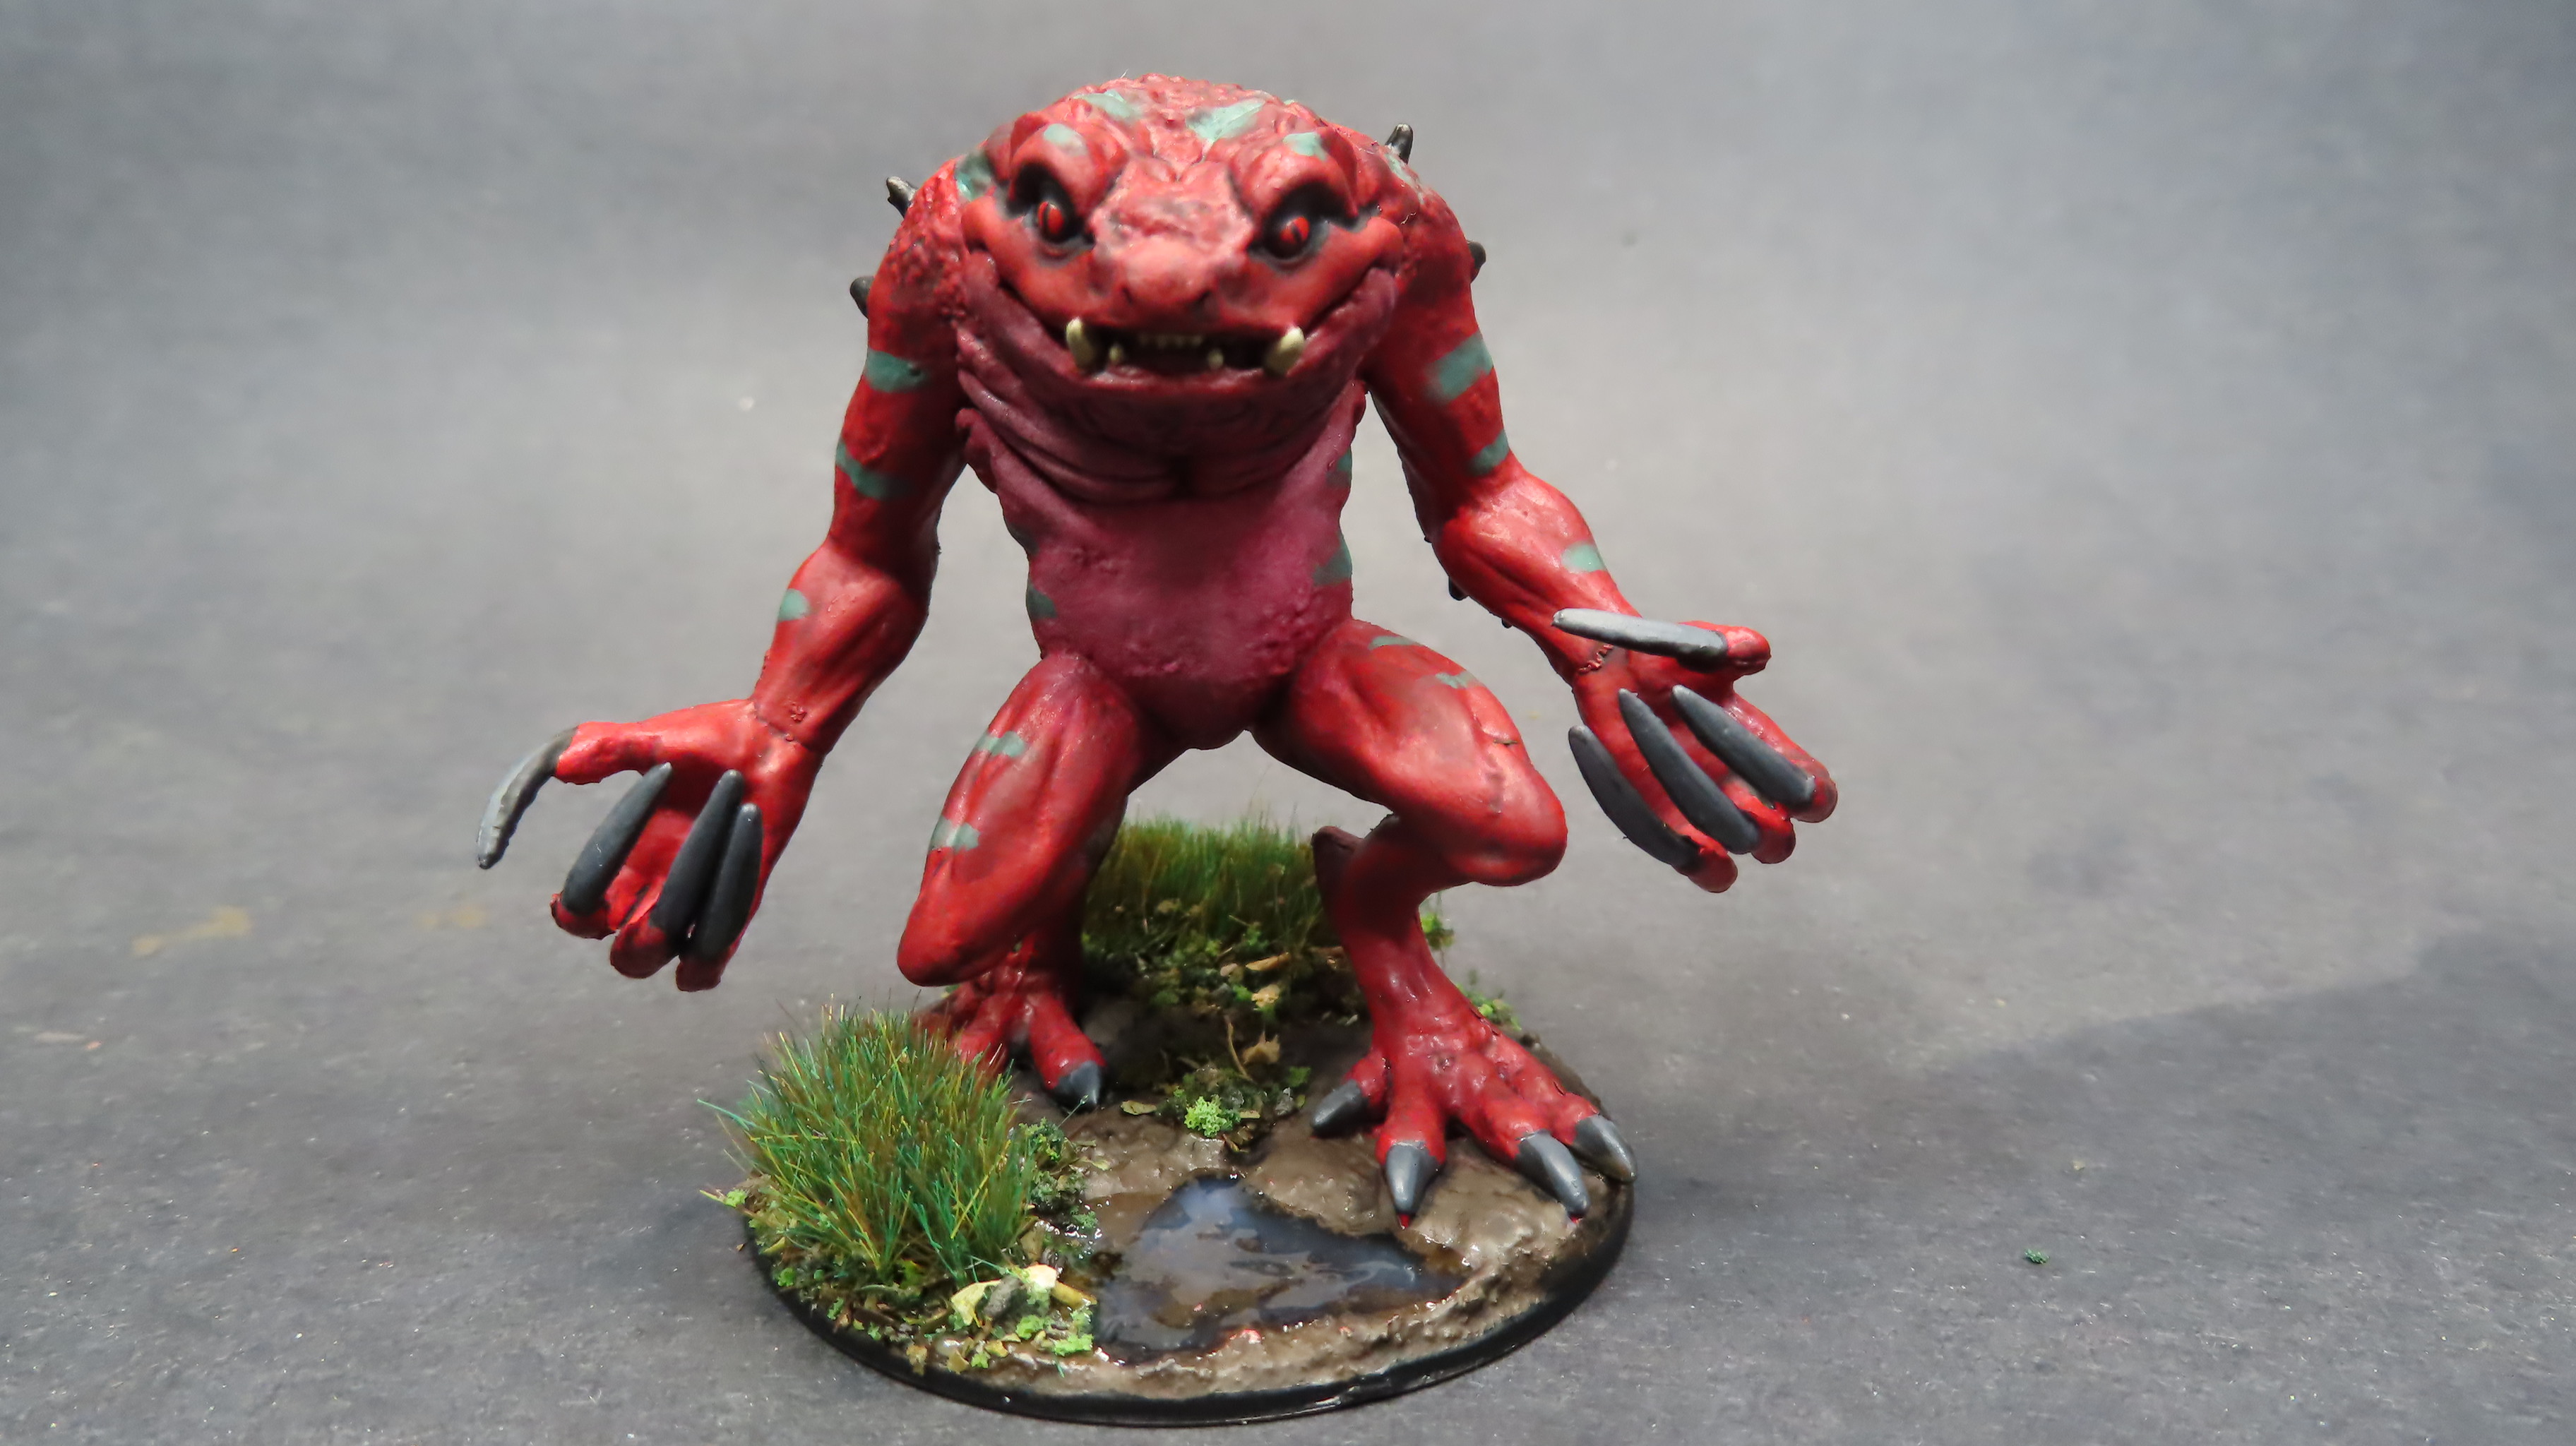 RUNESTORM on Twitter: up this red slaad from the dungeons and dragons @wizkidsgames line if you would like to see how i this up you can my youtube video